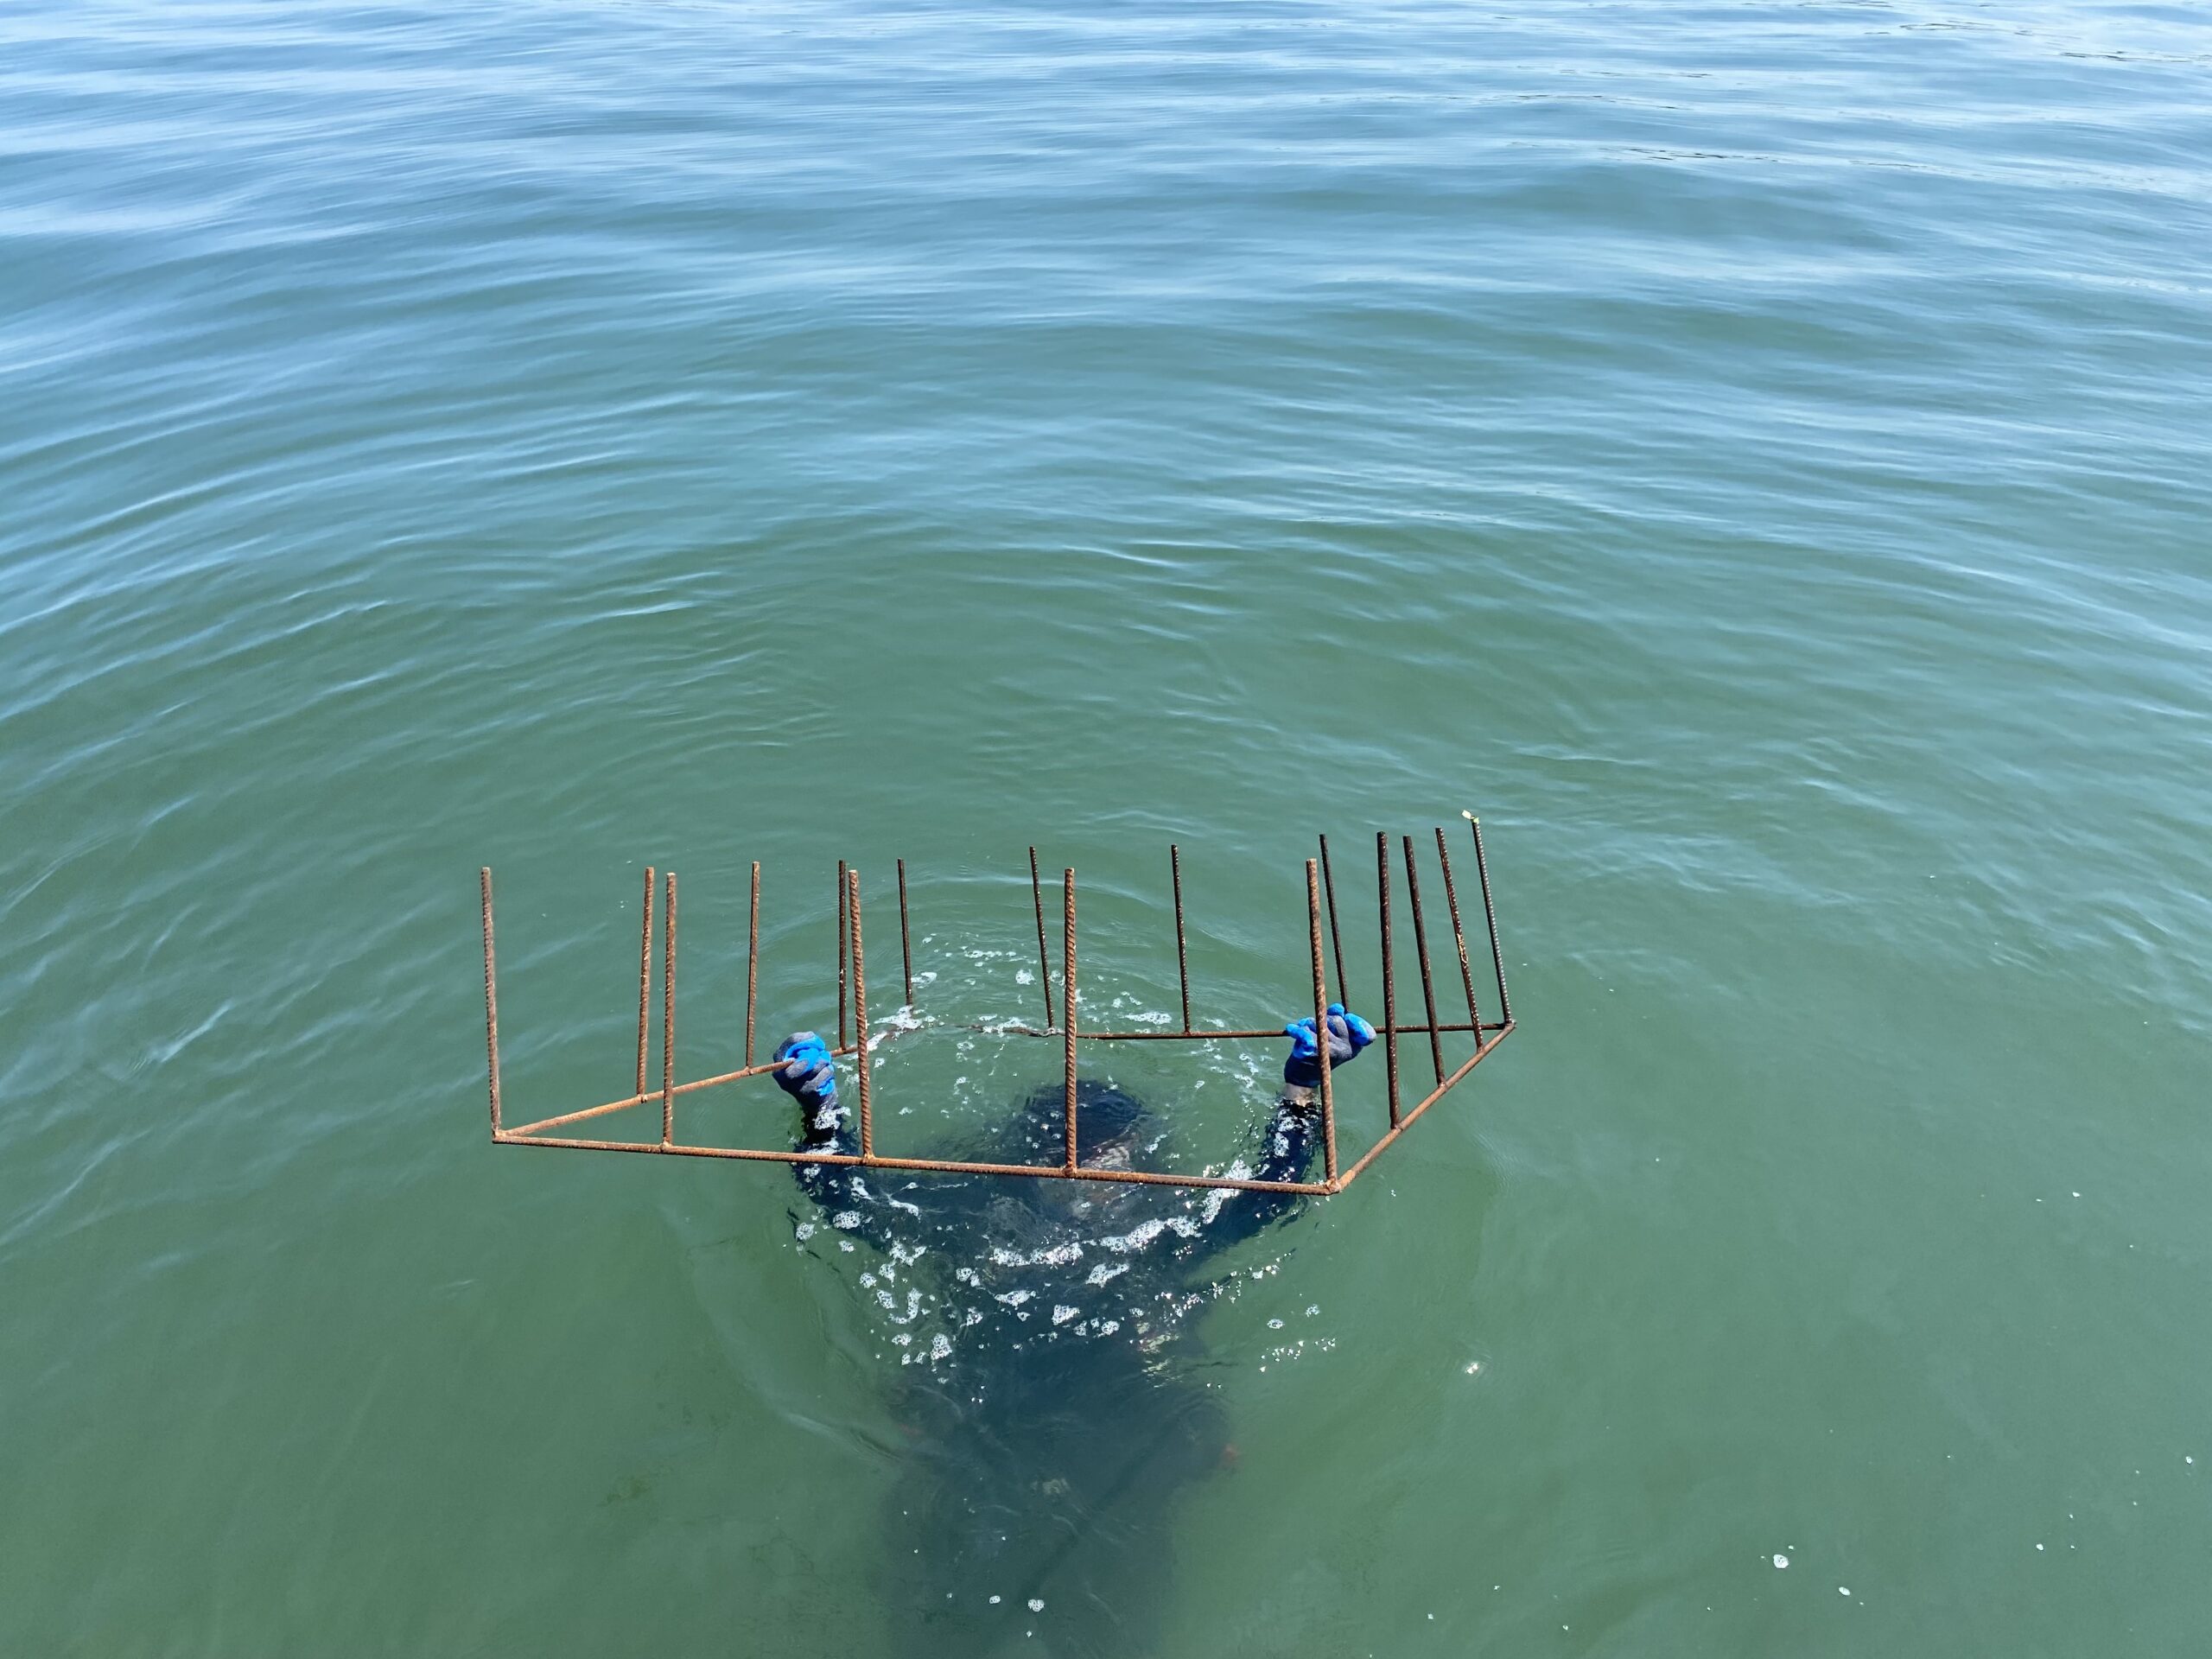 A Stony Brook University biologist raising an exclusion pen that researchers have used to try to protect scallops from being eaten by cow nose rays, in order to gauge how much of an impact the voracious species may be having on scallop populations.